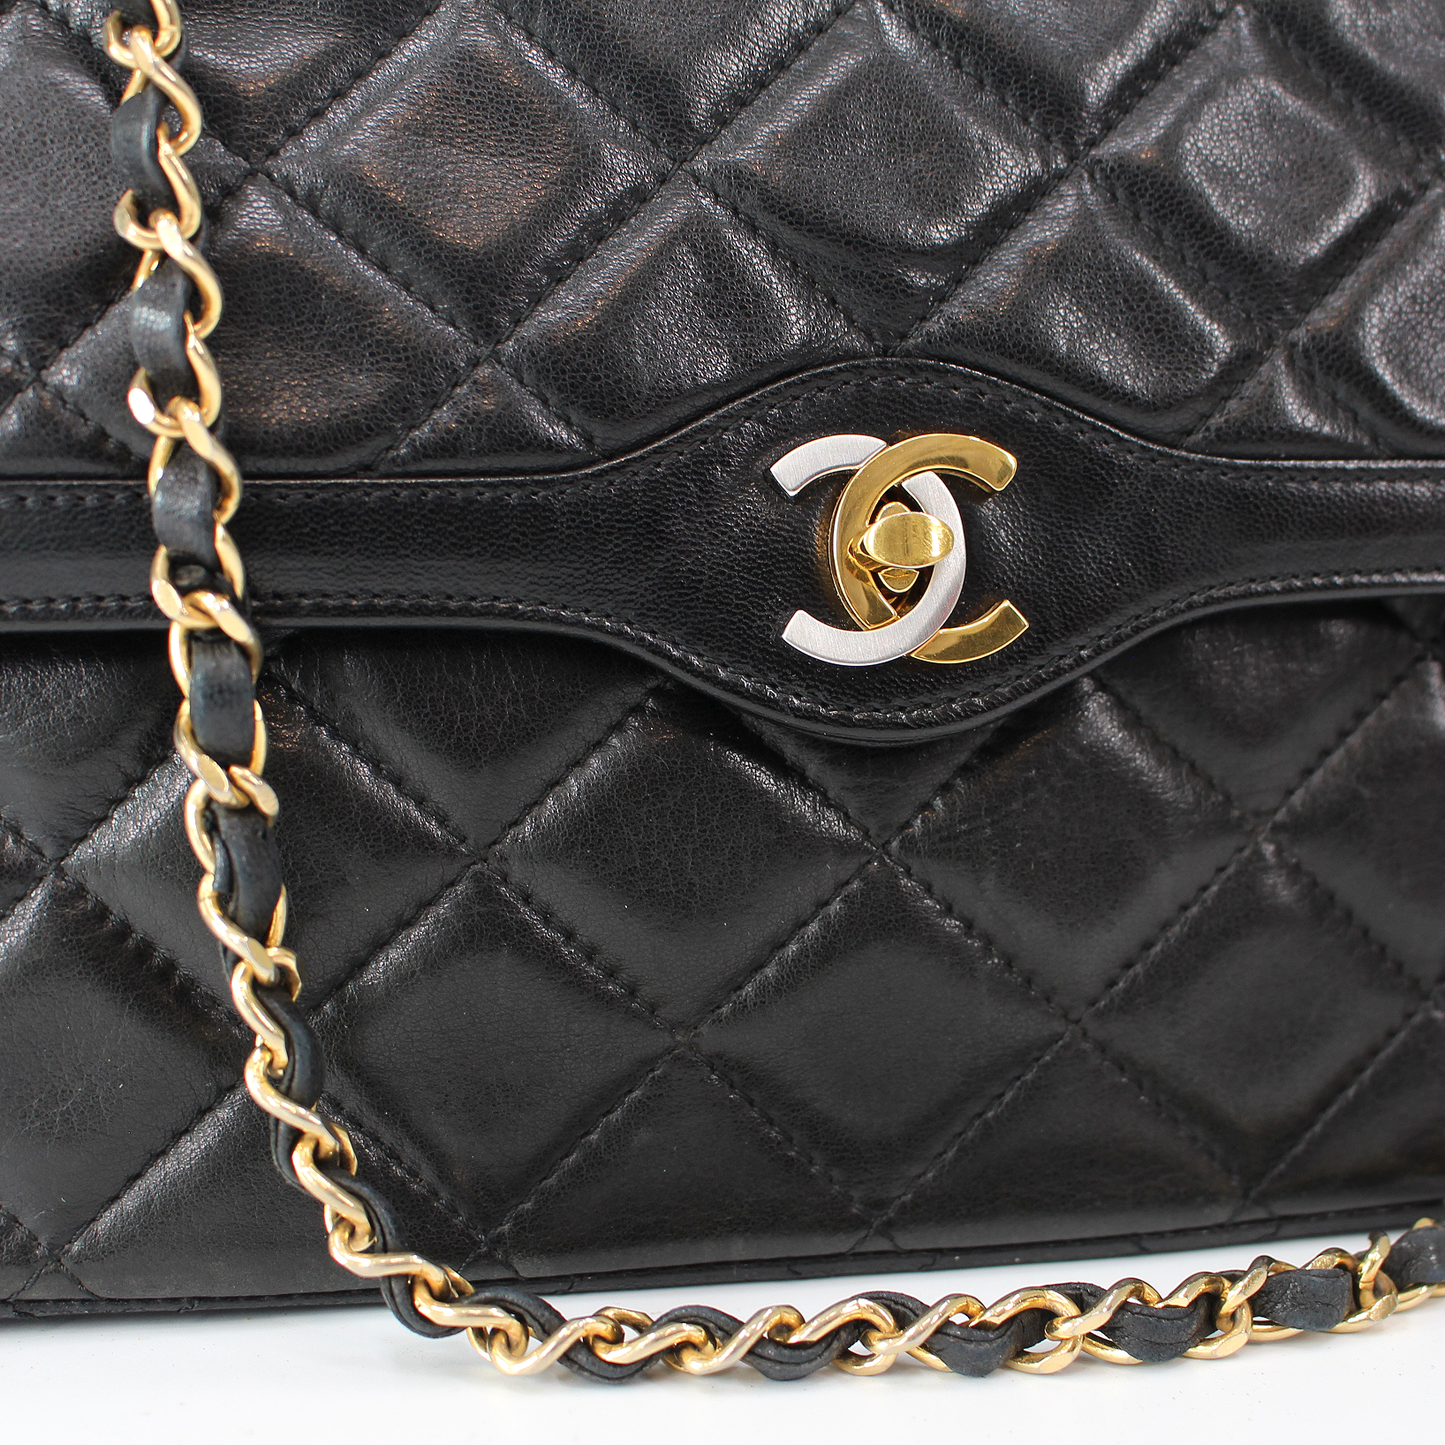 Chanel Quilted Double Flap Handbag